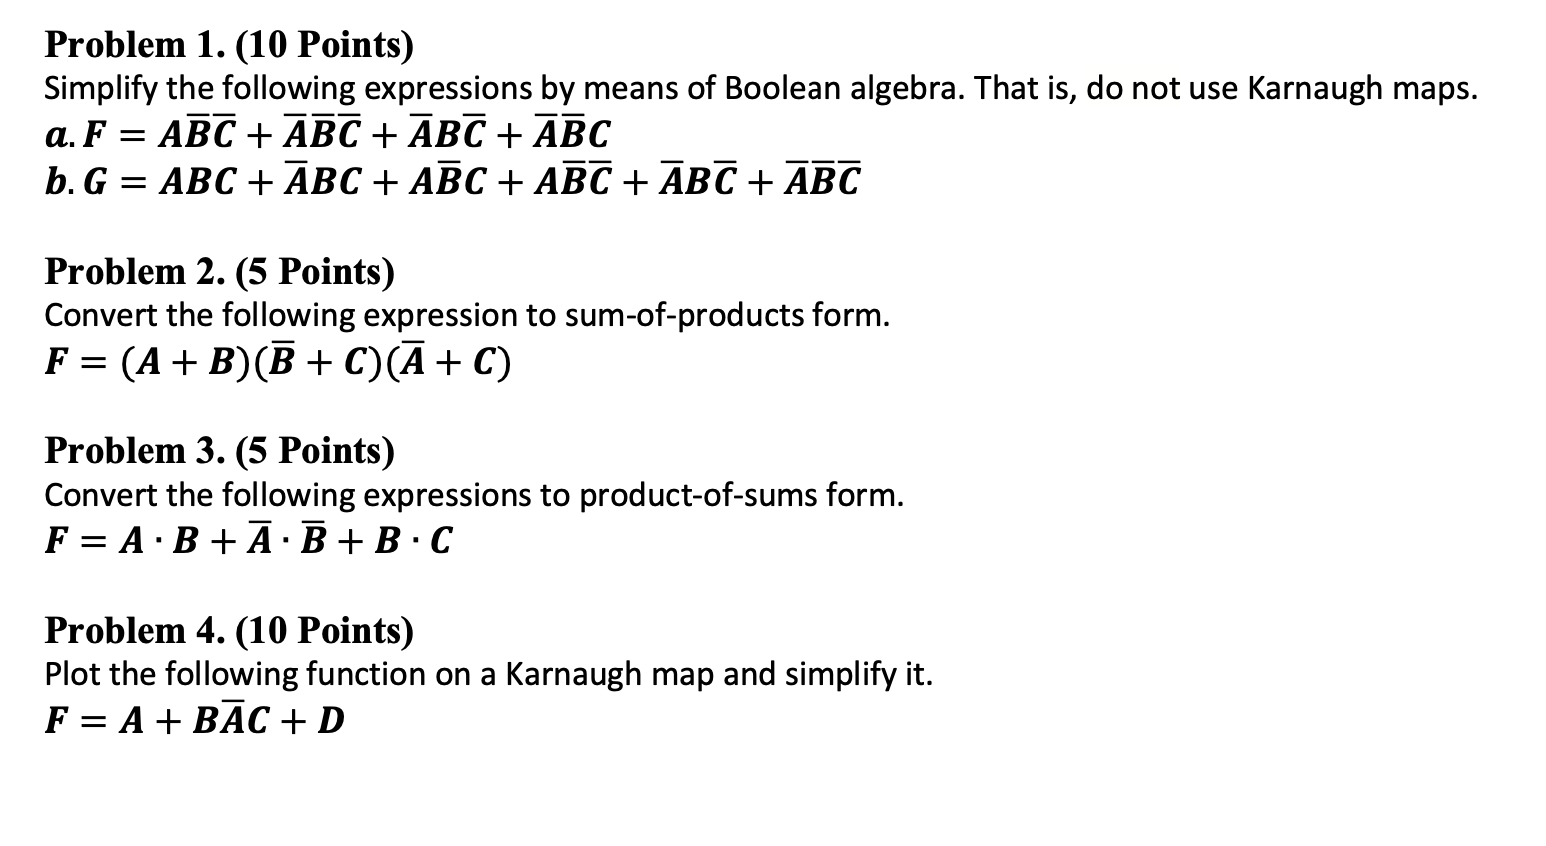 Problem 1. (10 Points) Simplify the following expressions by means of Boolean algebra. That is, do not use